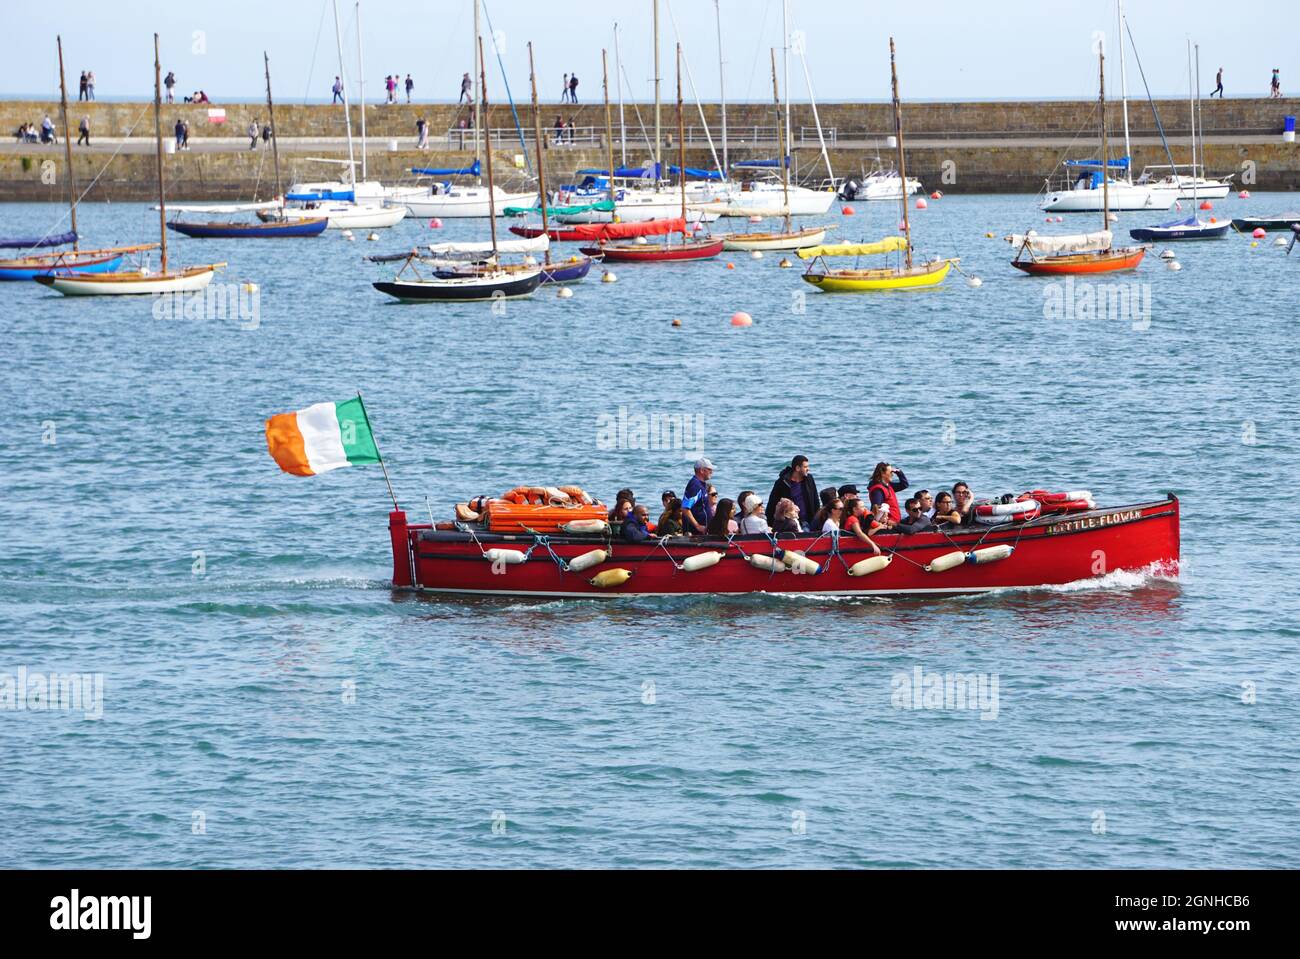 A bright red tour boat flying the flag of Ireland speeds past a fleet of colorful sailboats moored inside the seawall at the village of Howth, Ireland Stock Photo